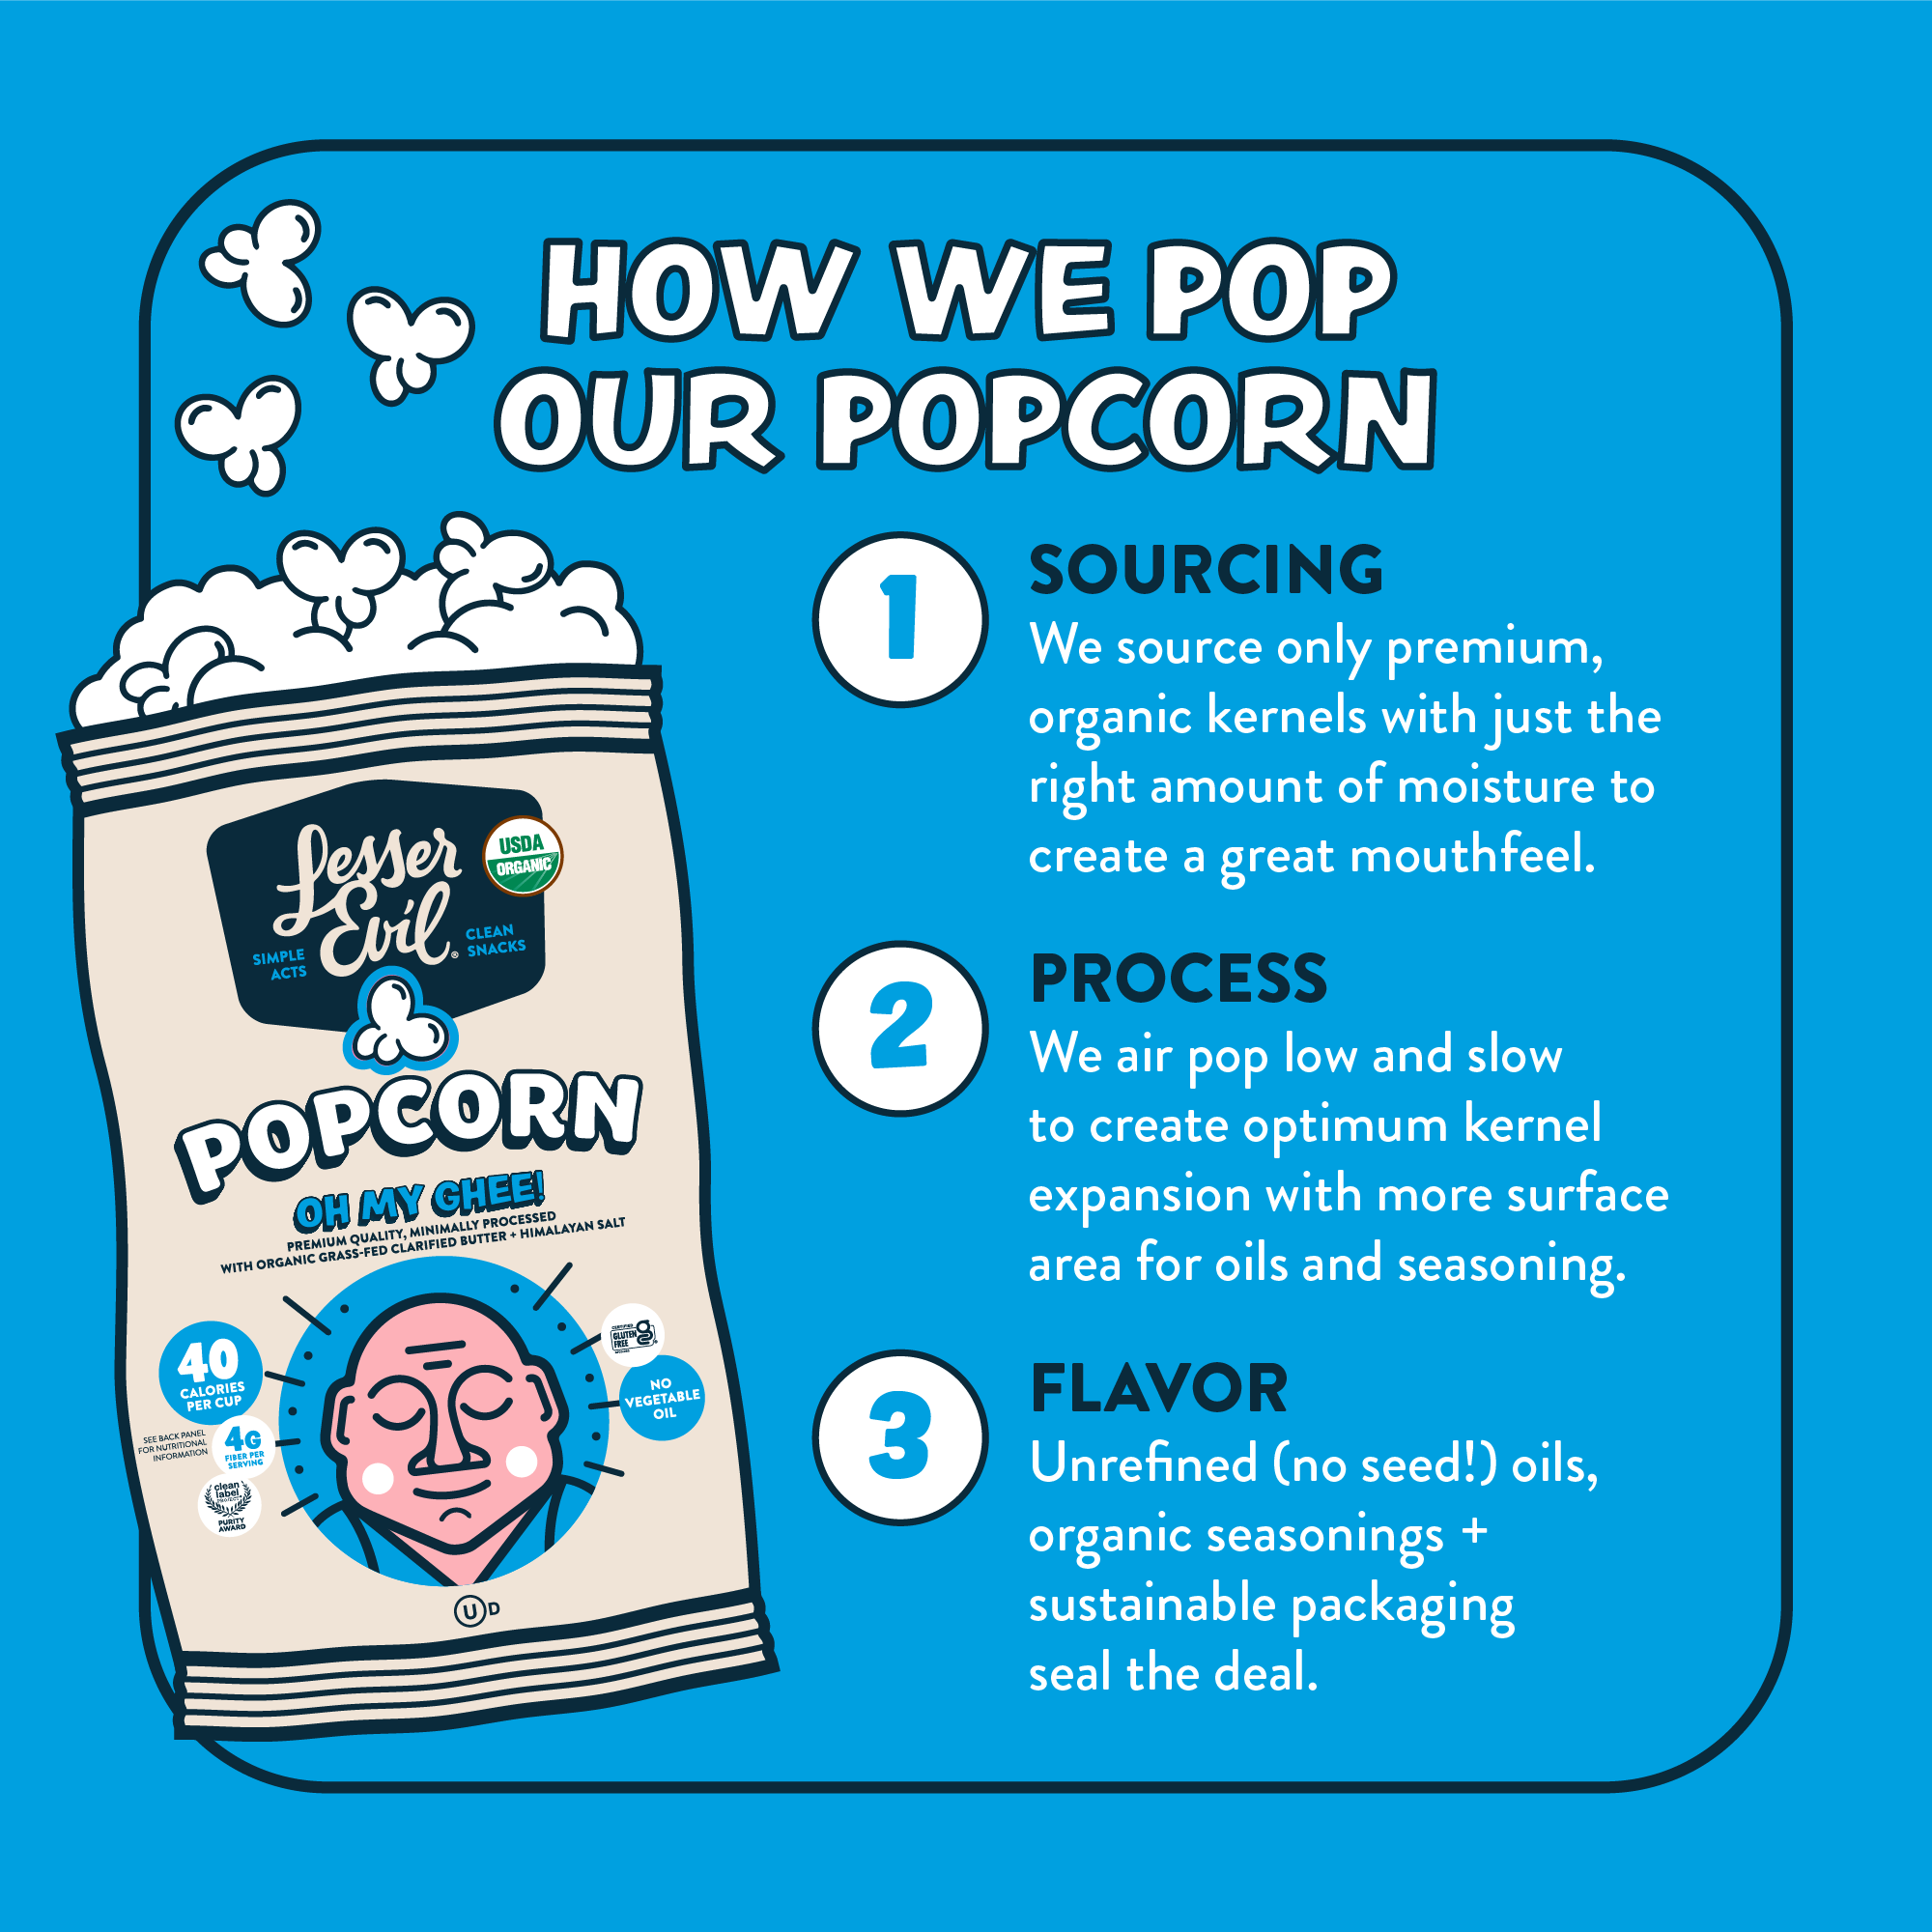 information about how we pop our ghee gourmet popcorn